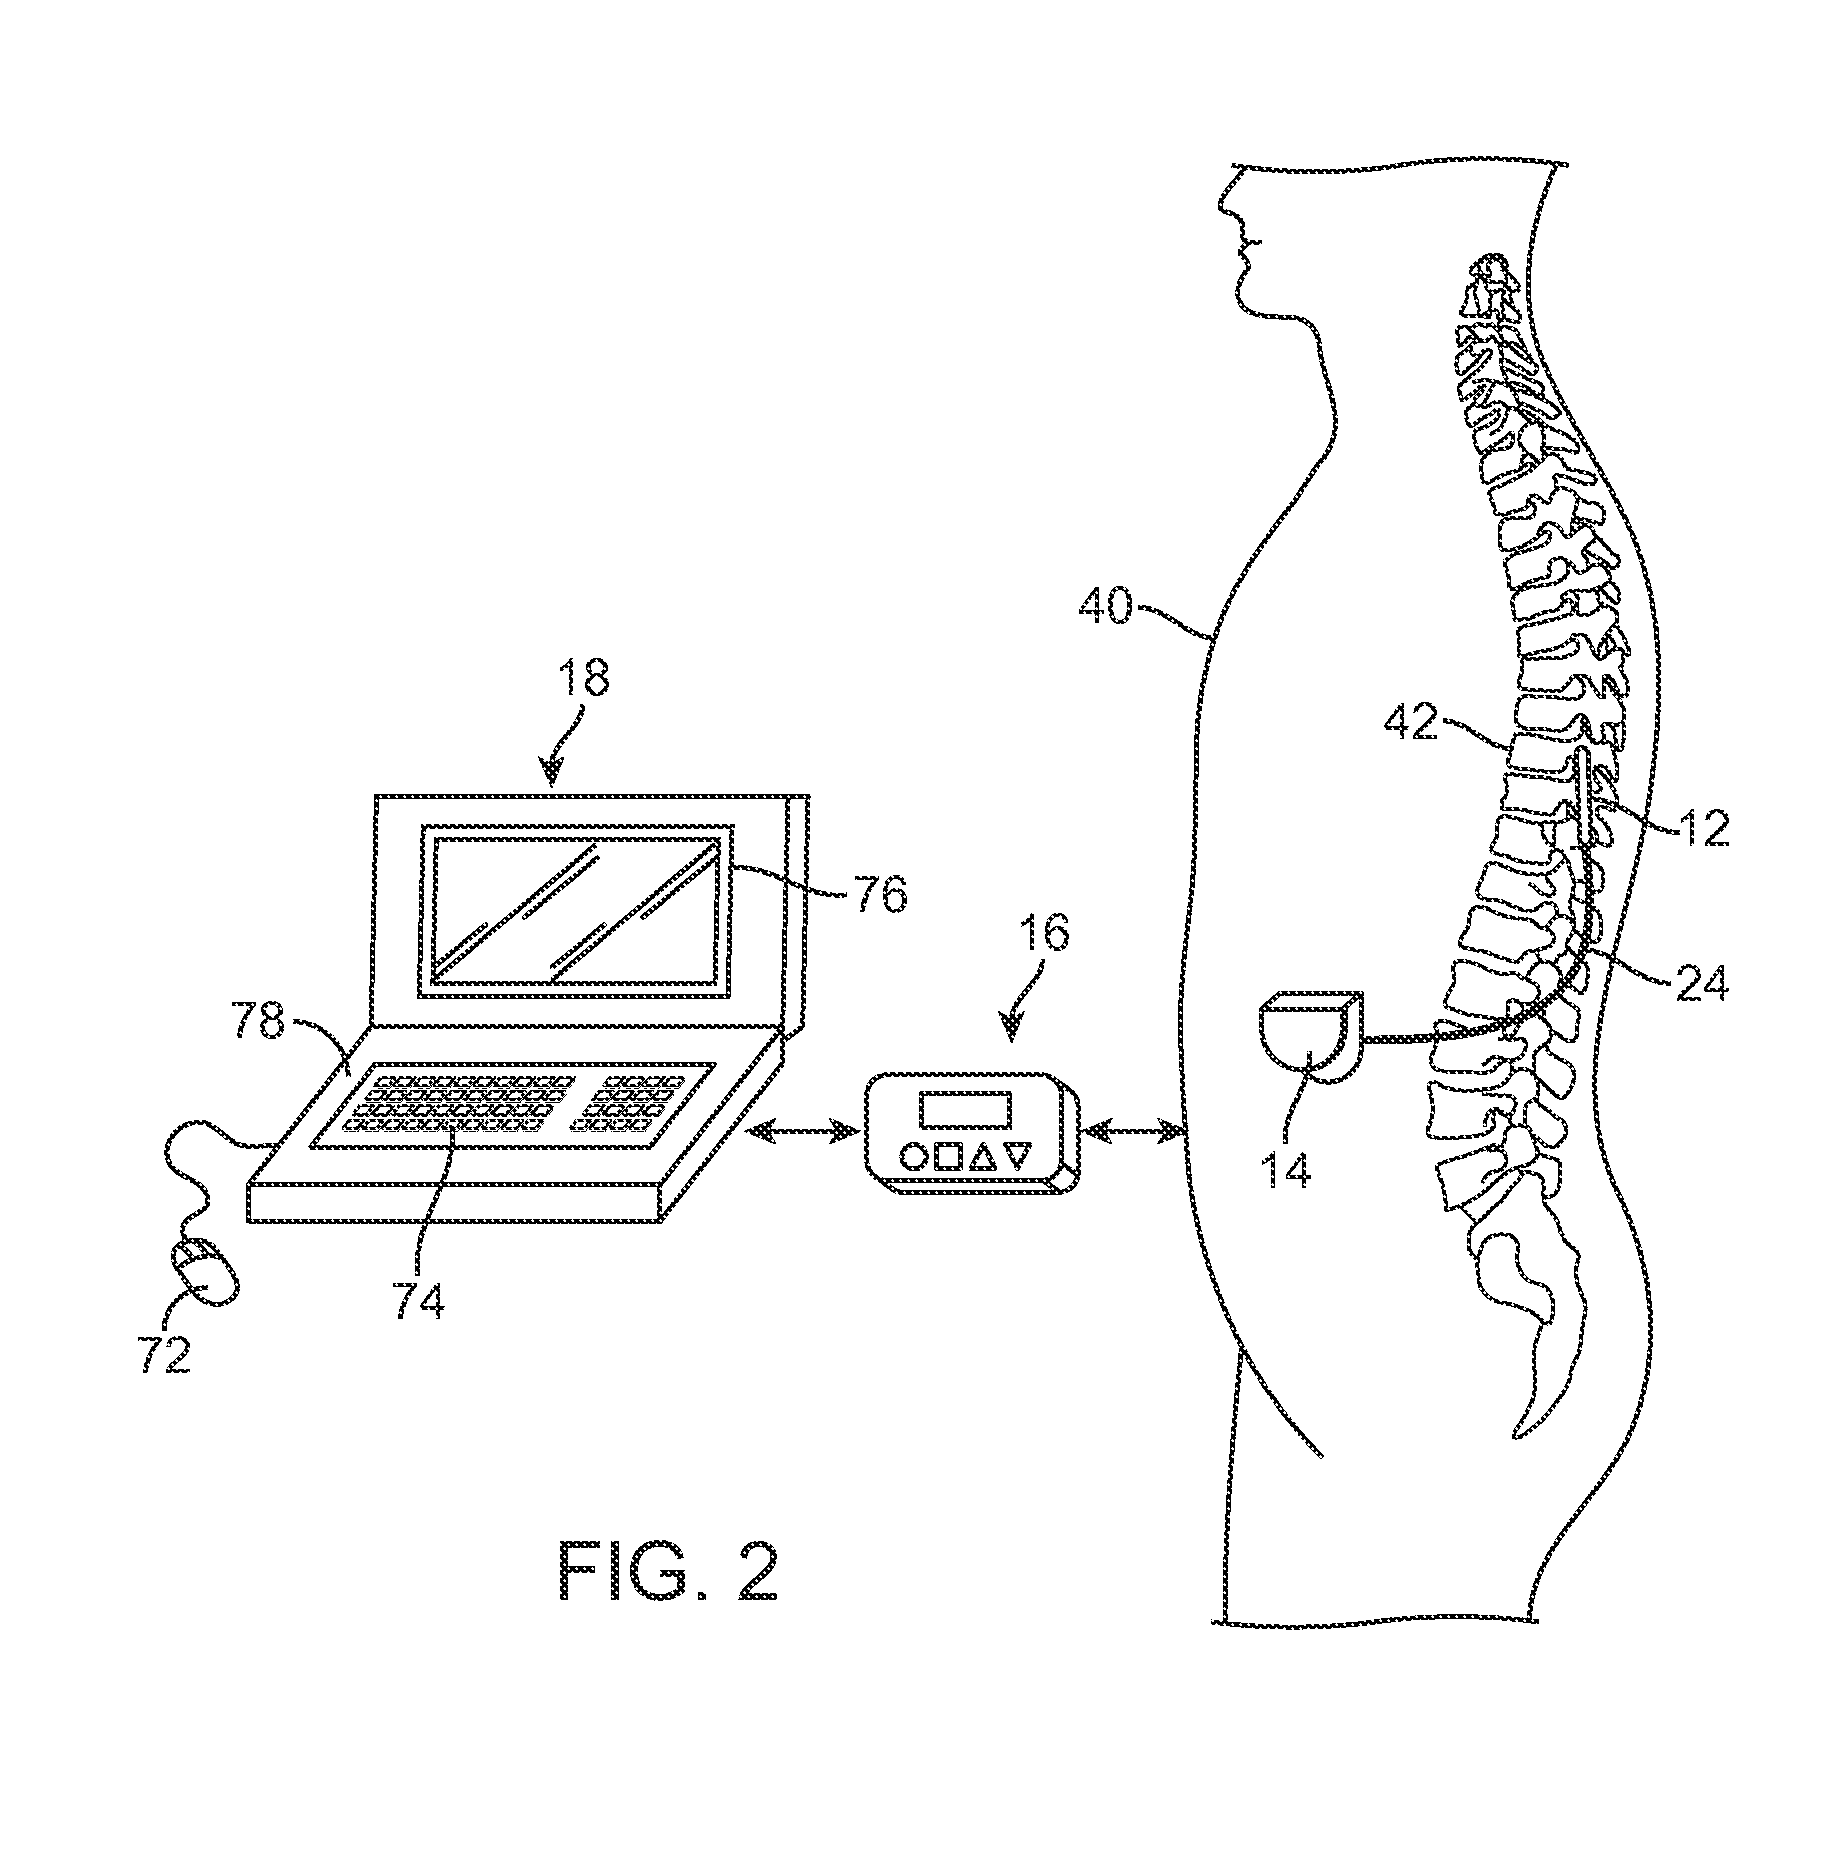 Systems and methods for delivering sub-threshold therapy to a patient at a physiological midline